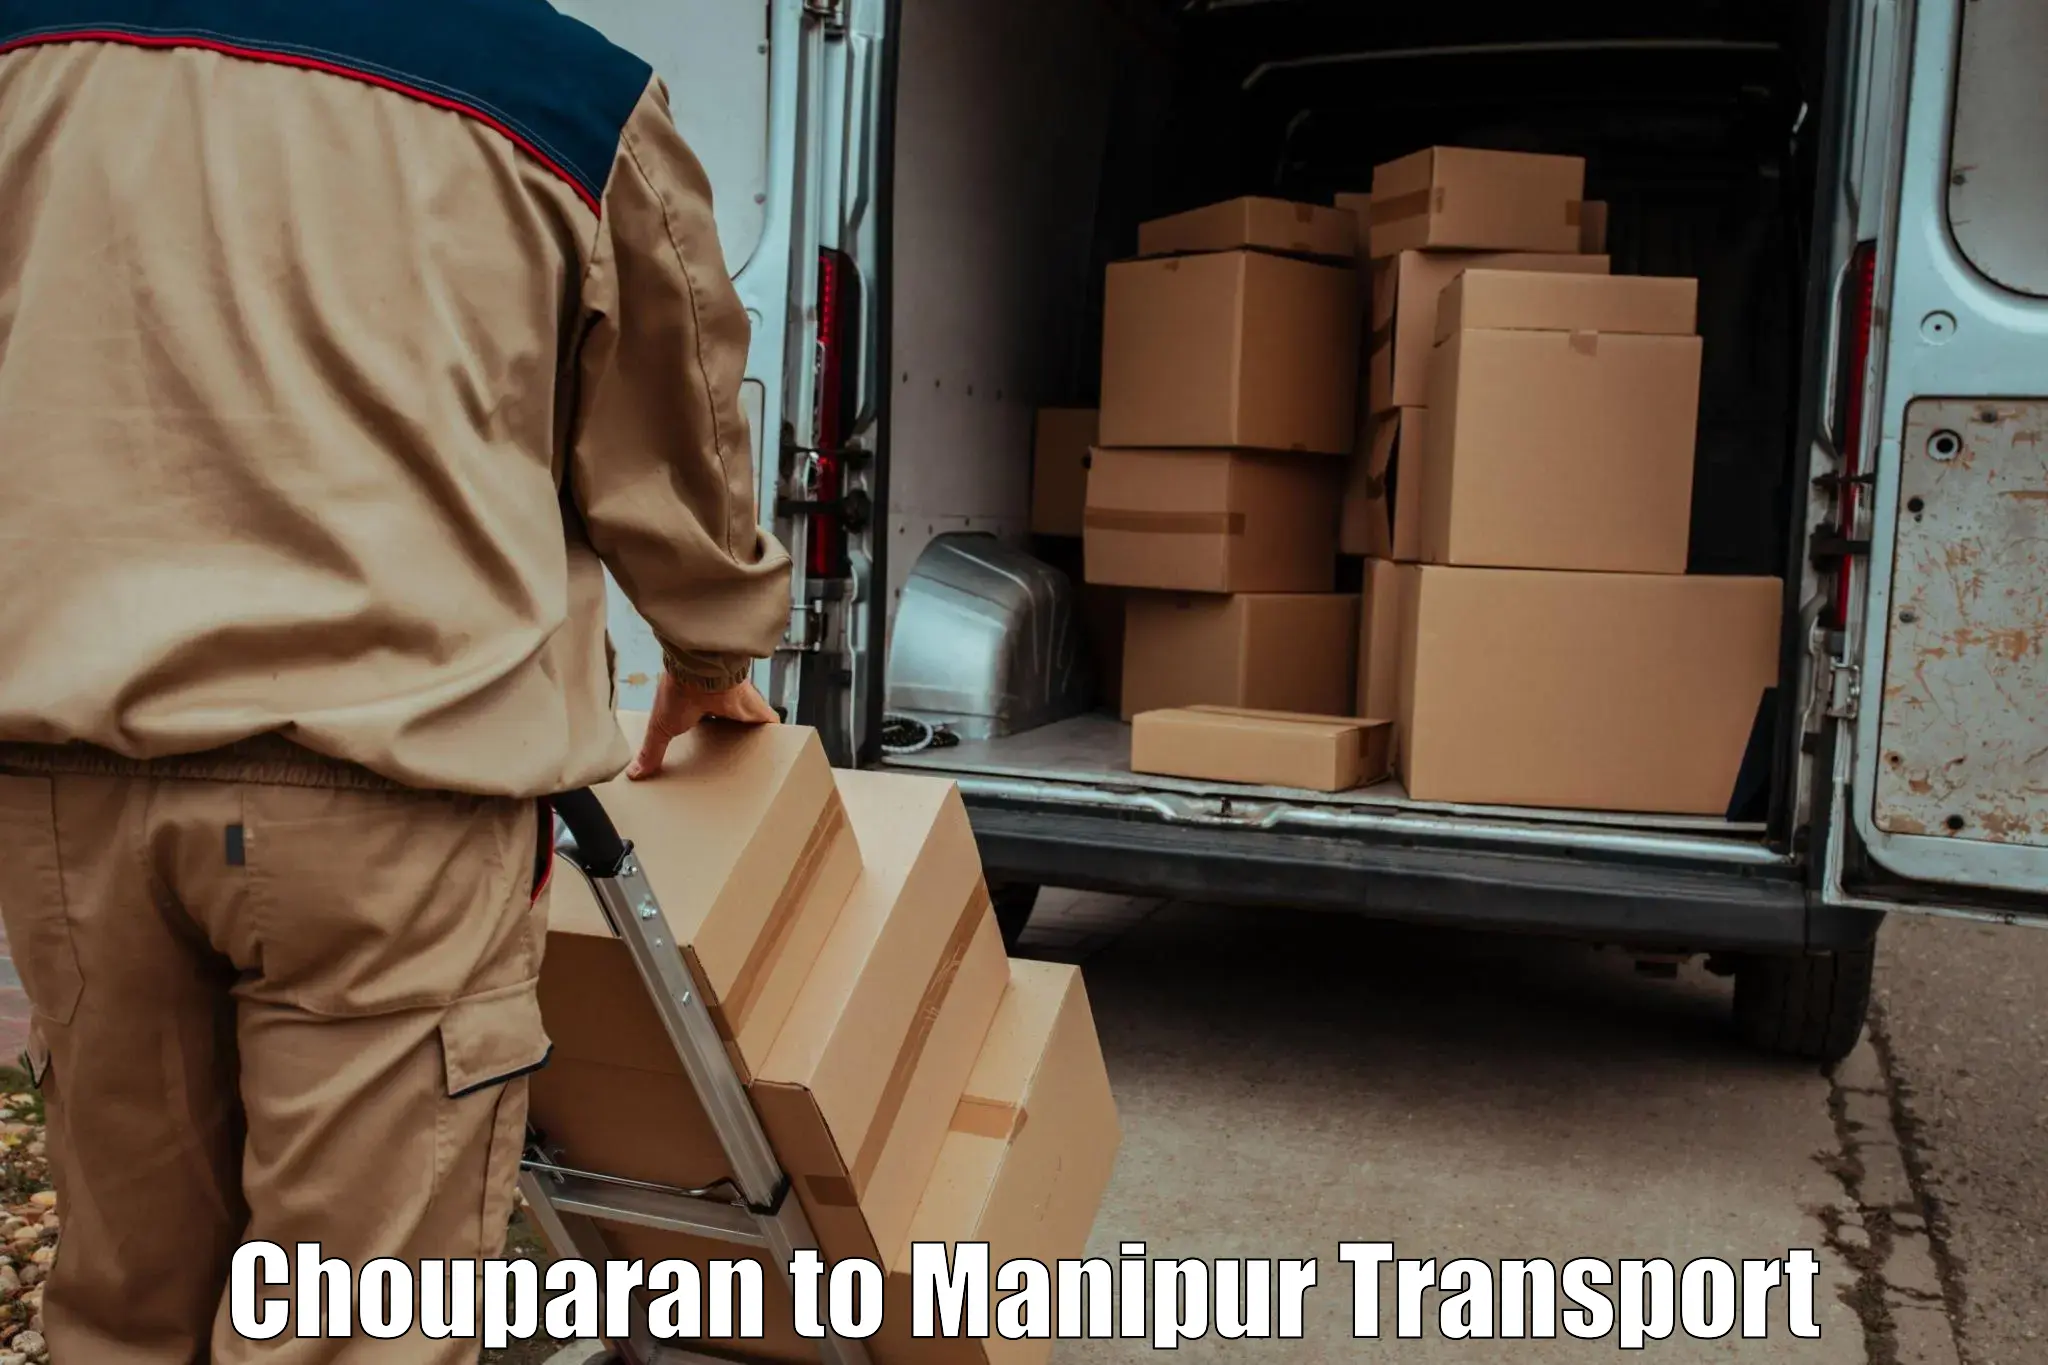 Air freight transport services Chouparan to Imphal